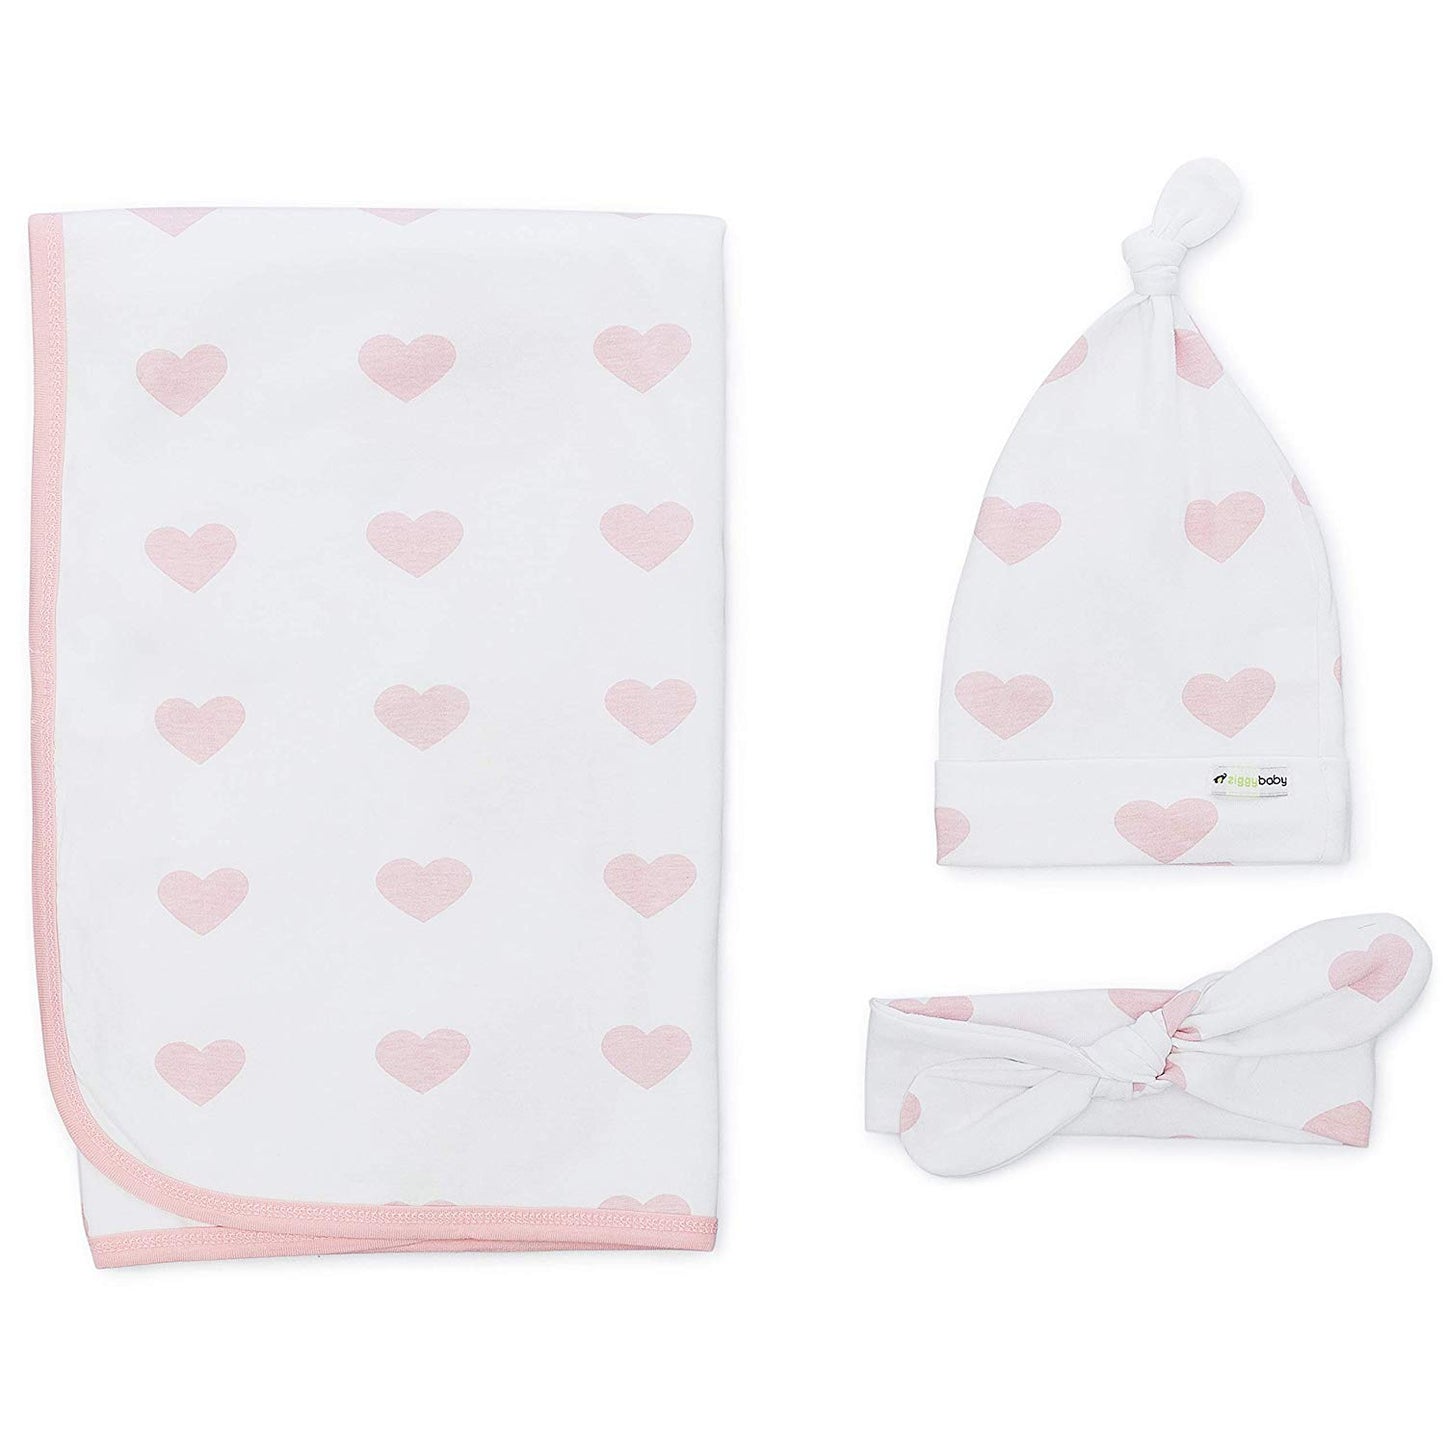 Peony & Heart 5 Piece Blanket, Hat and Headband Collection Pink White